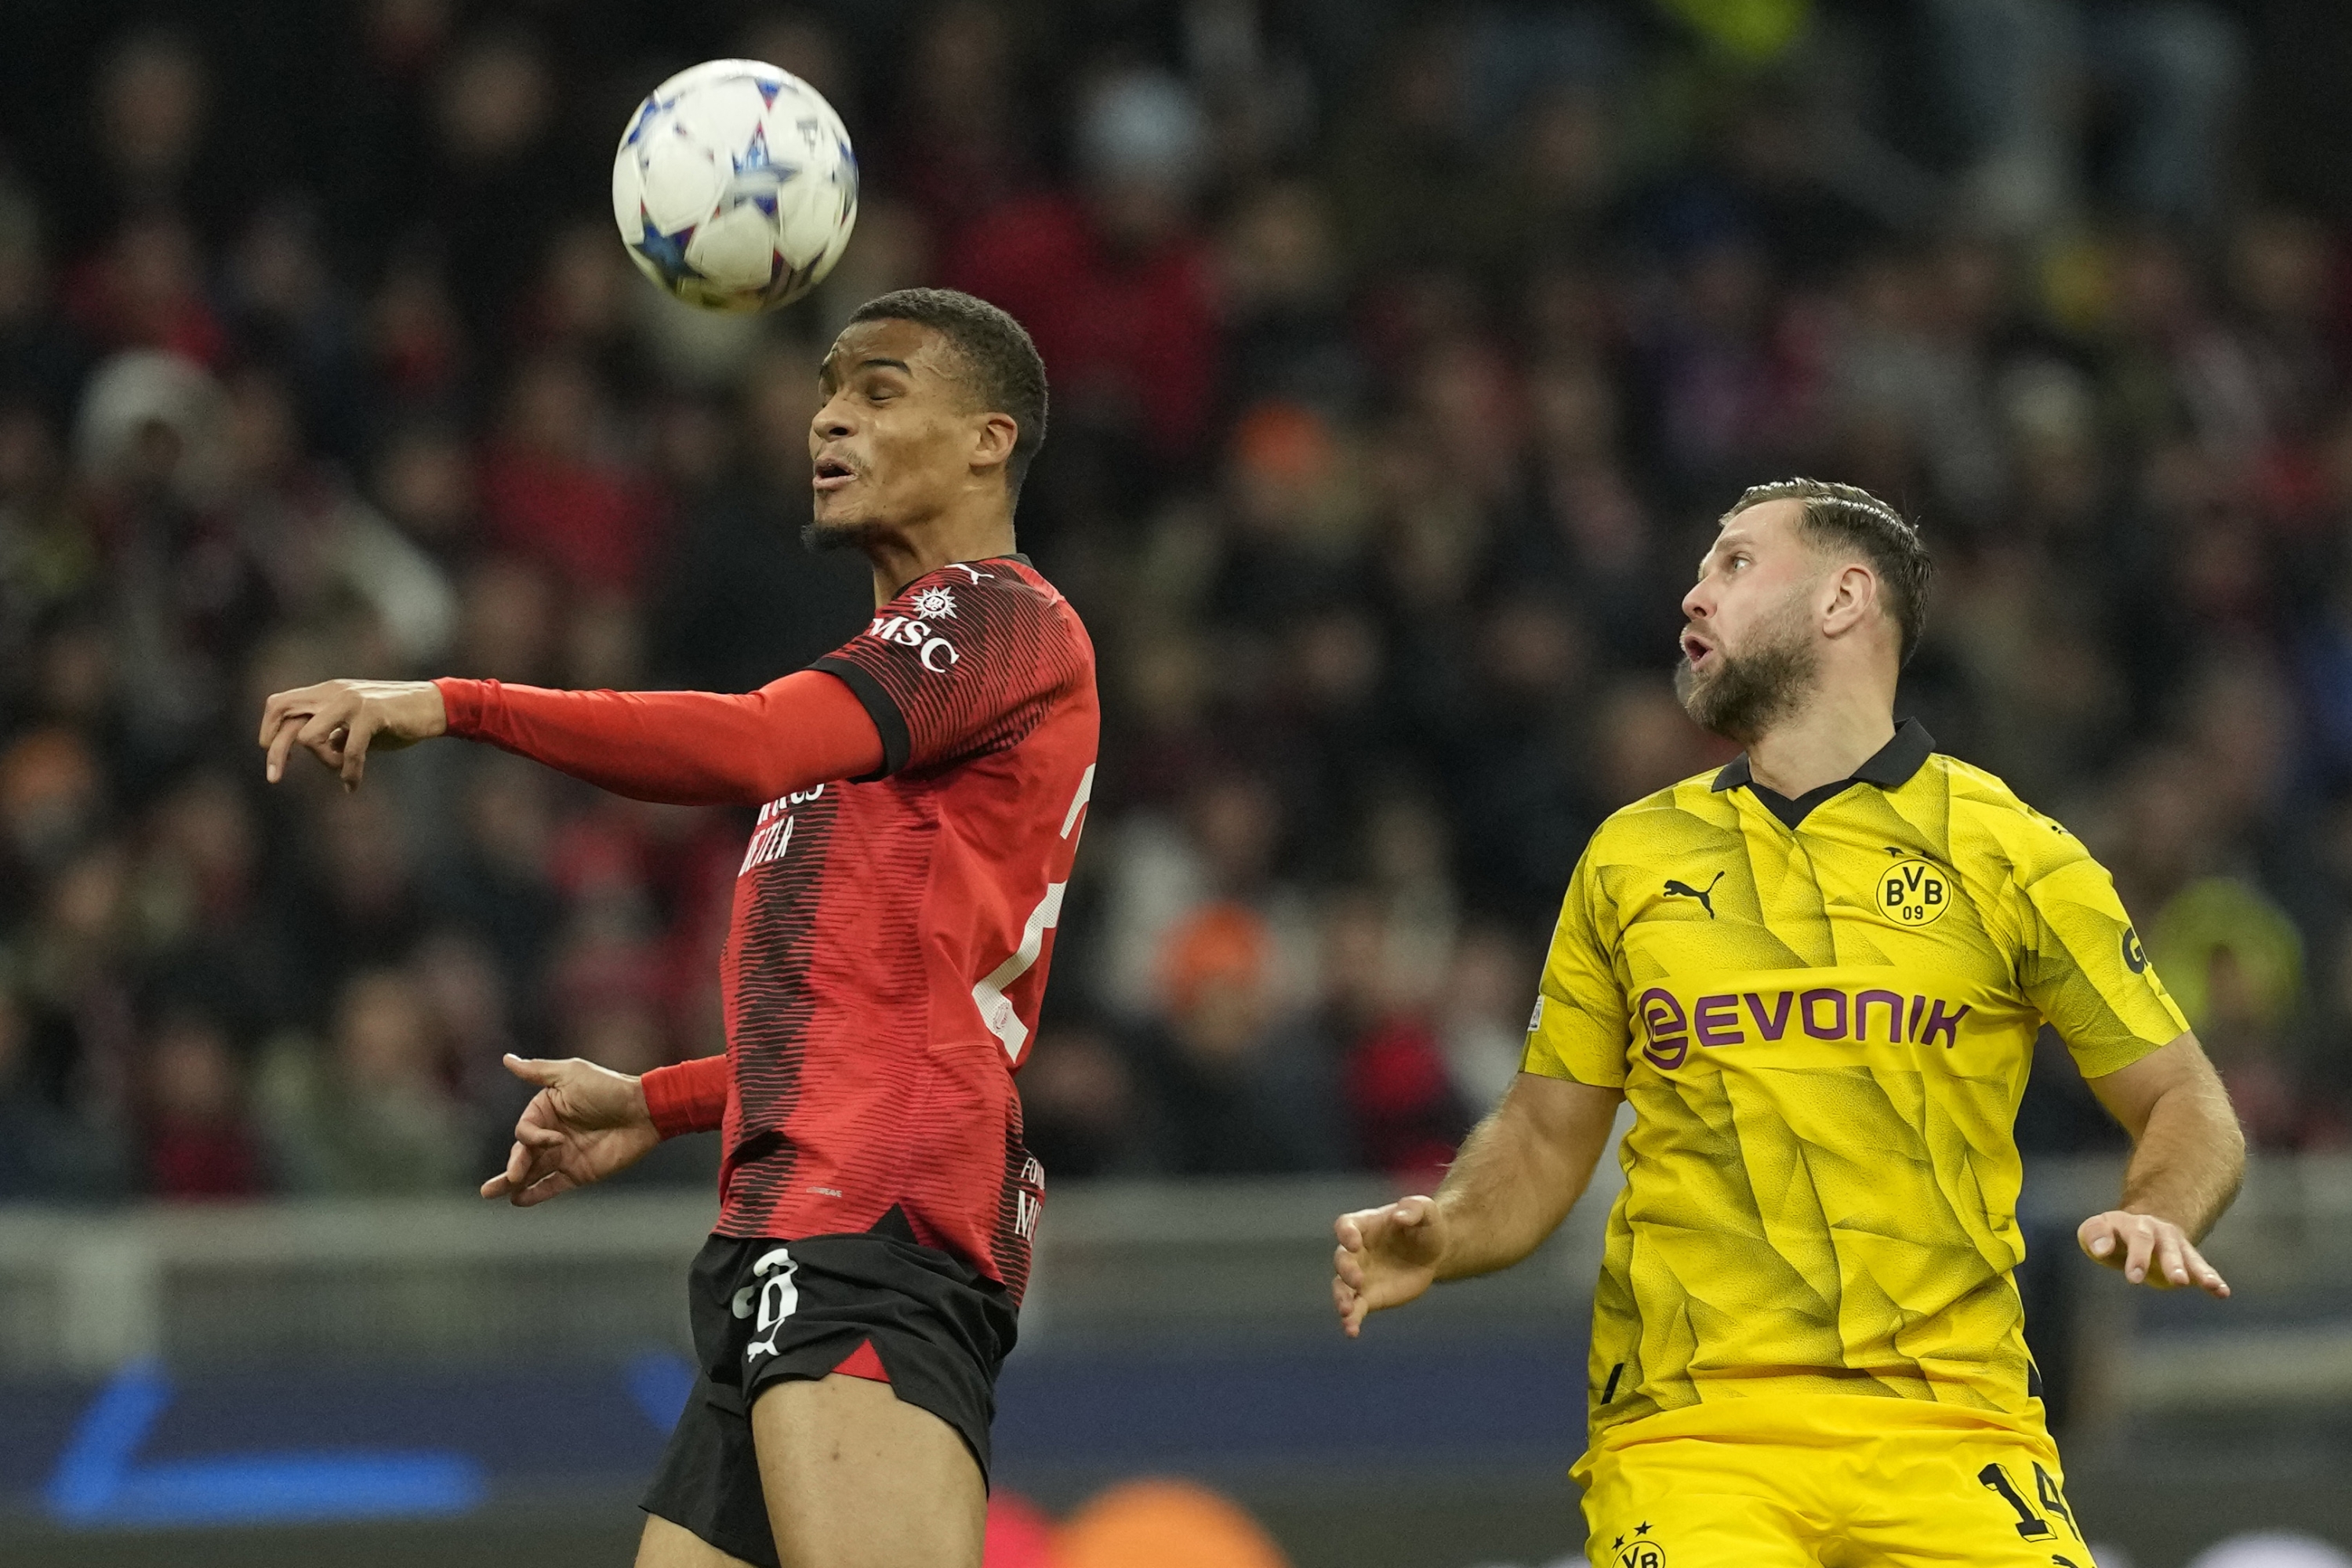 AC Milan's Malick Thiaw heads the ball during the Champions League group F soccer match between AC Milan and Borussia Dortmund at the San Siro stadium in Milan, Italy, Tuesday, Nov. 28, 2023. (AP Photo/Antonio Calanni)